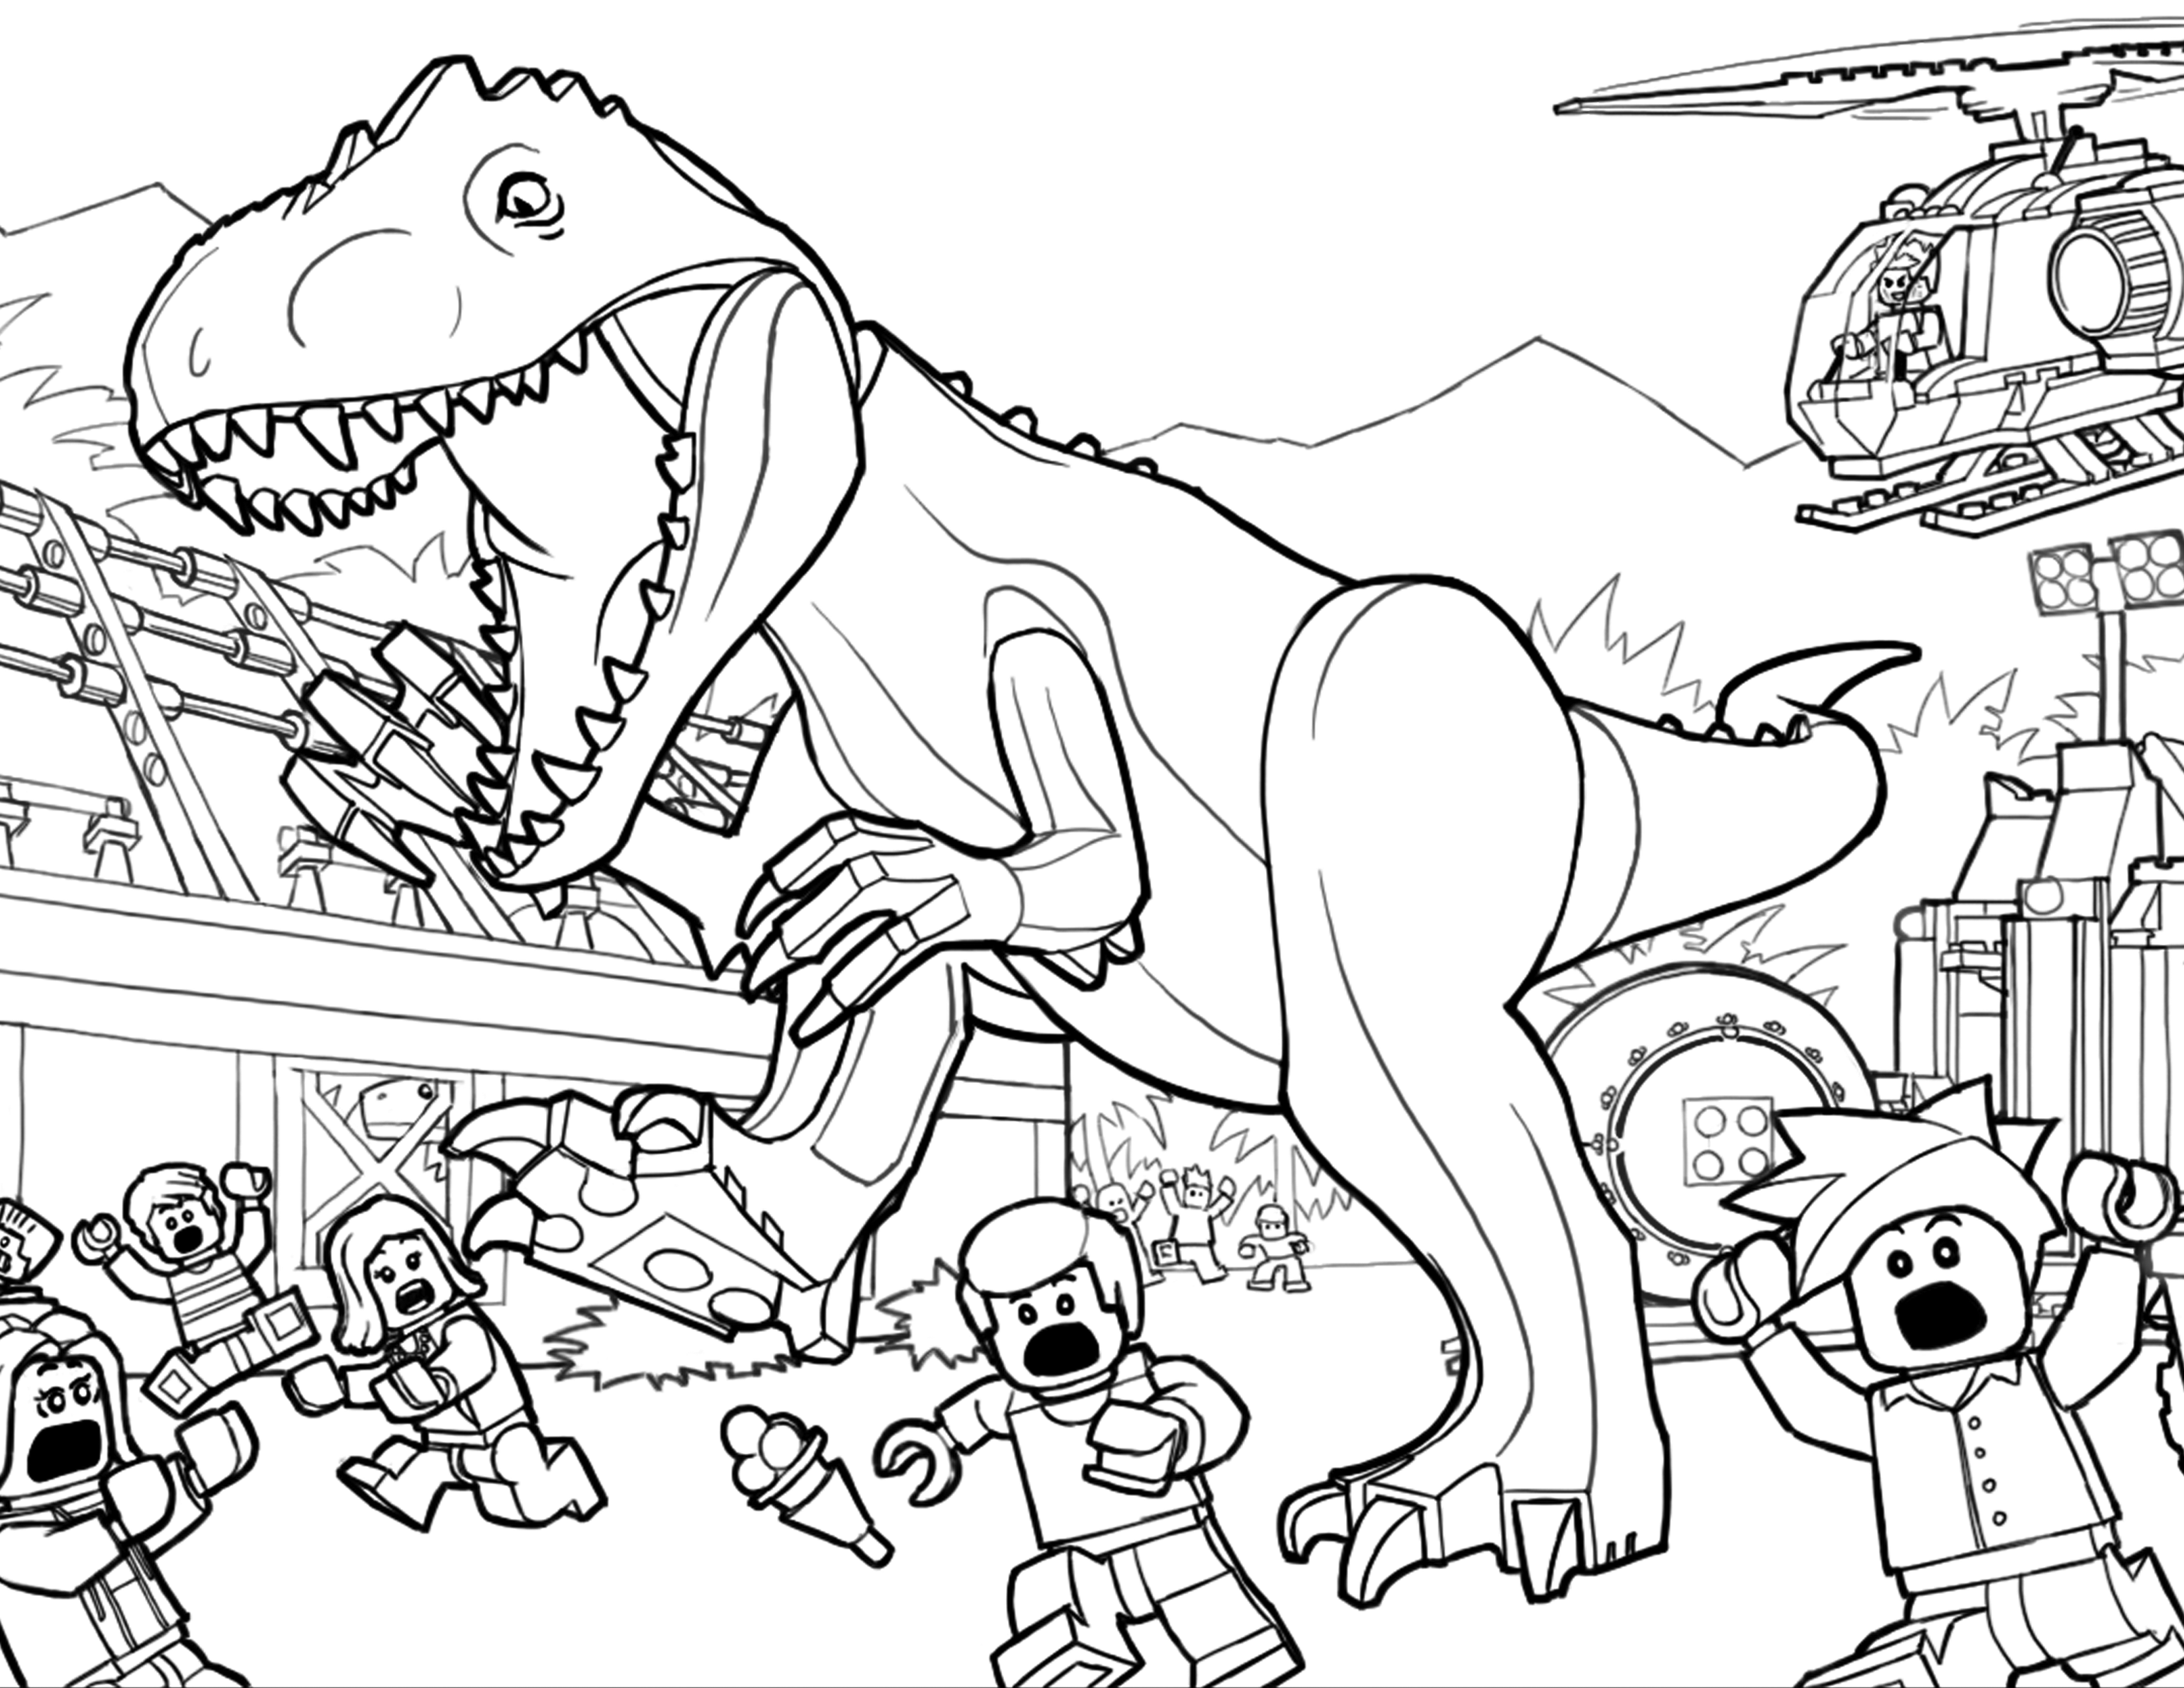 Download TRex Coloring Pages - Best Coloring Pages For Kids